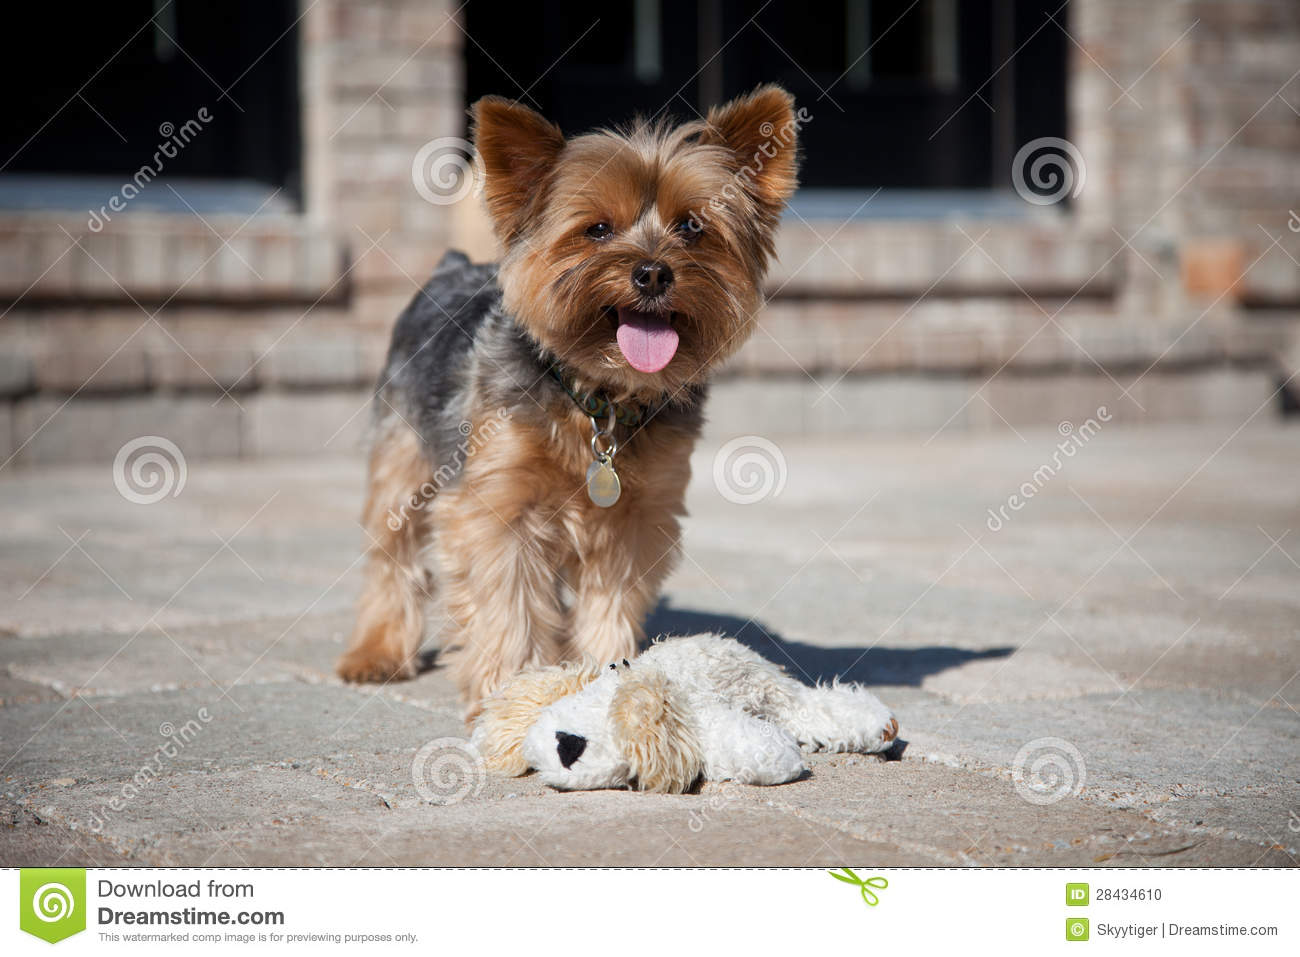 Yorkie Standing On Stone Patio Tongue Hanging Out Wearing Collar And